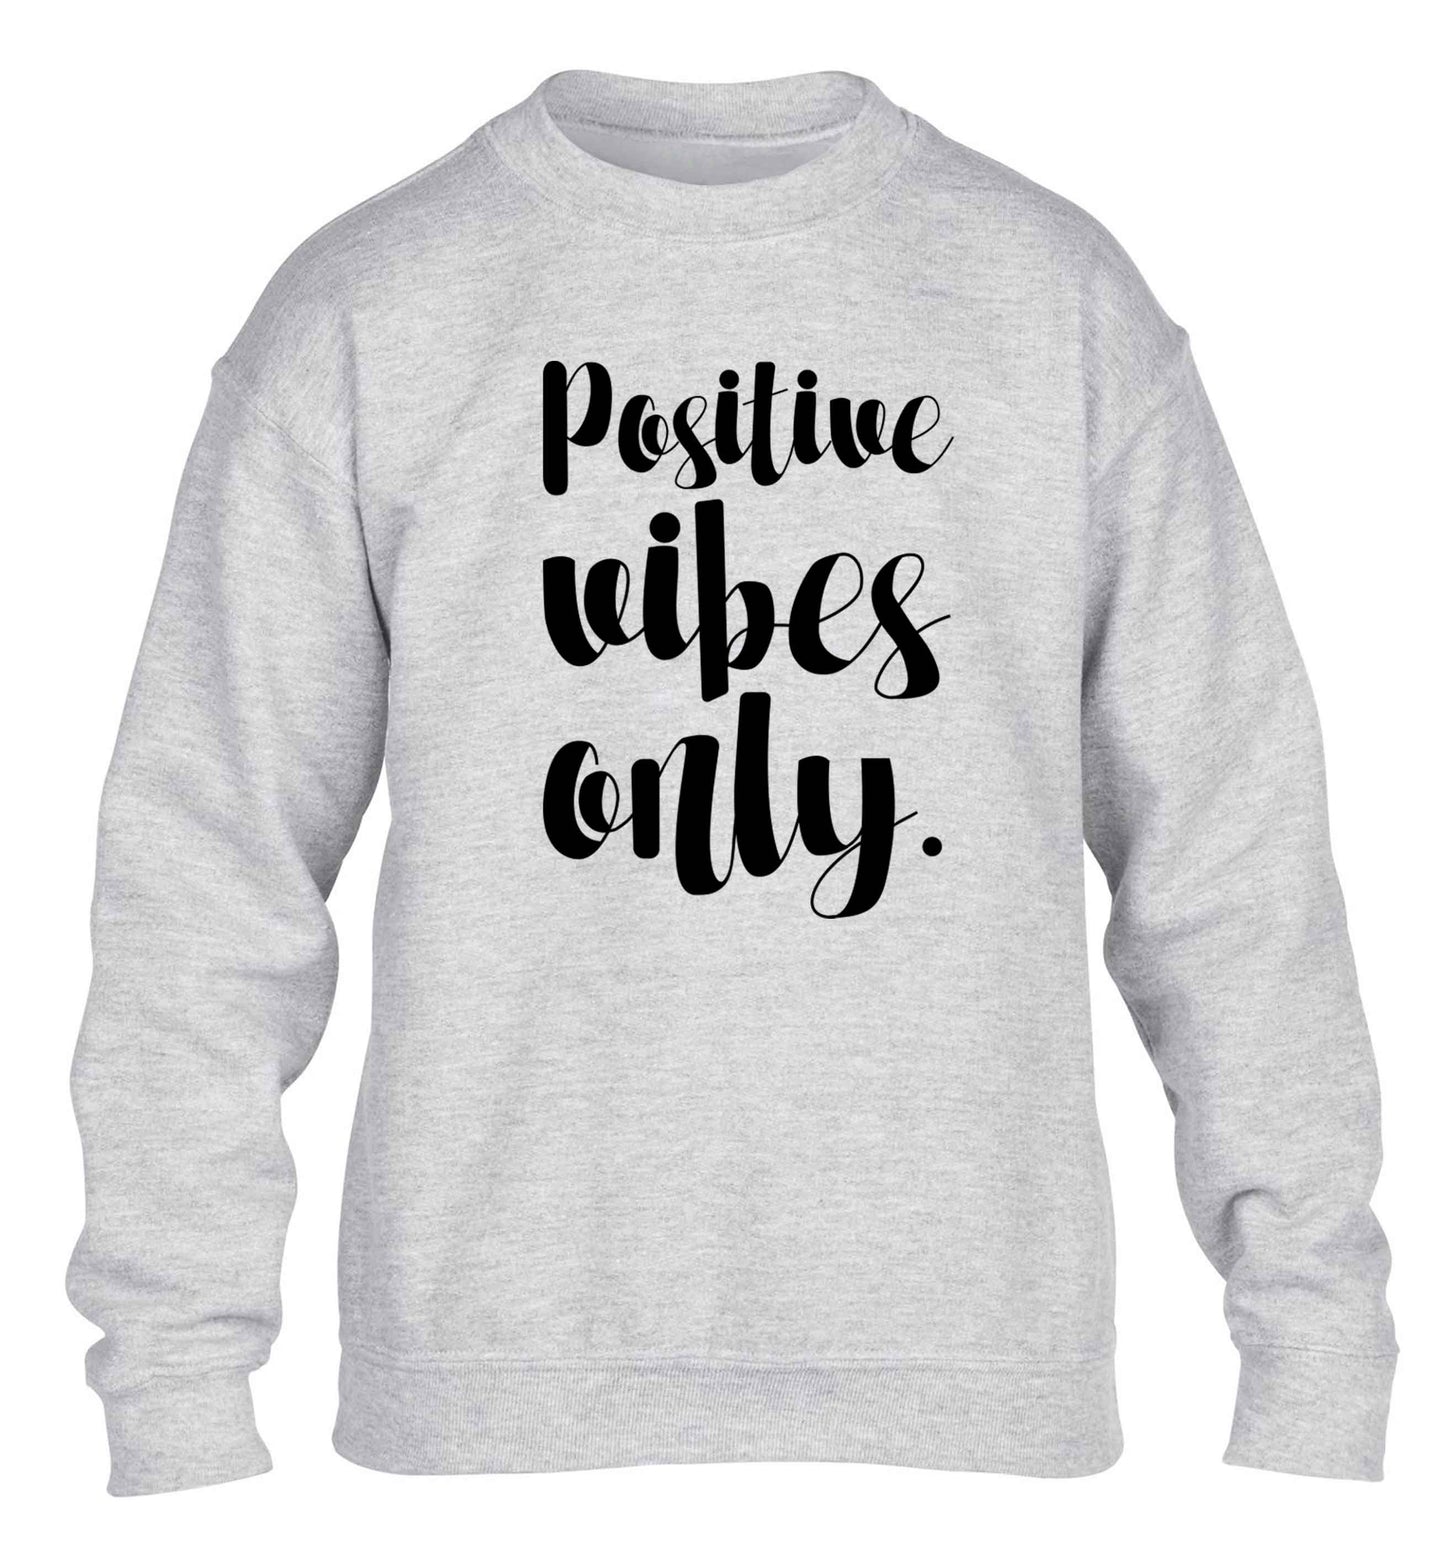 Positive vibes only children's grey sweater 12-13 Years